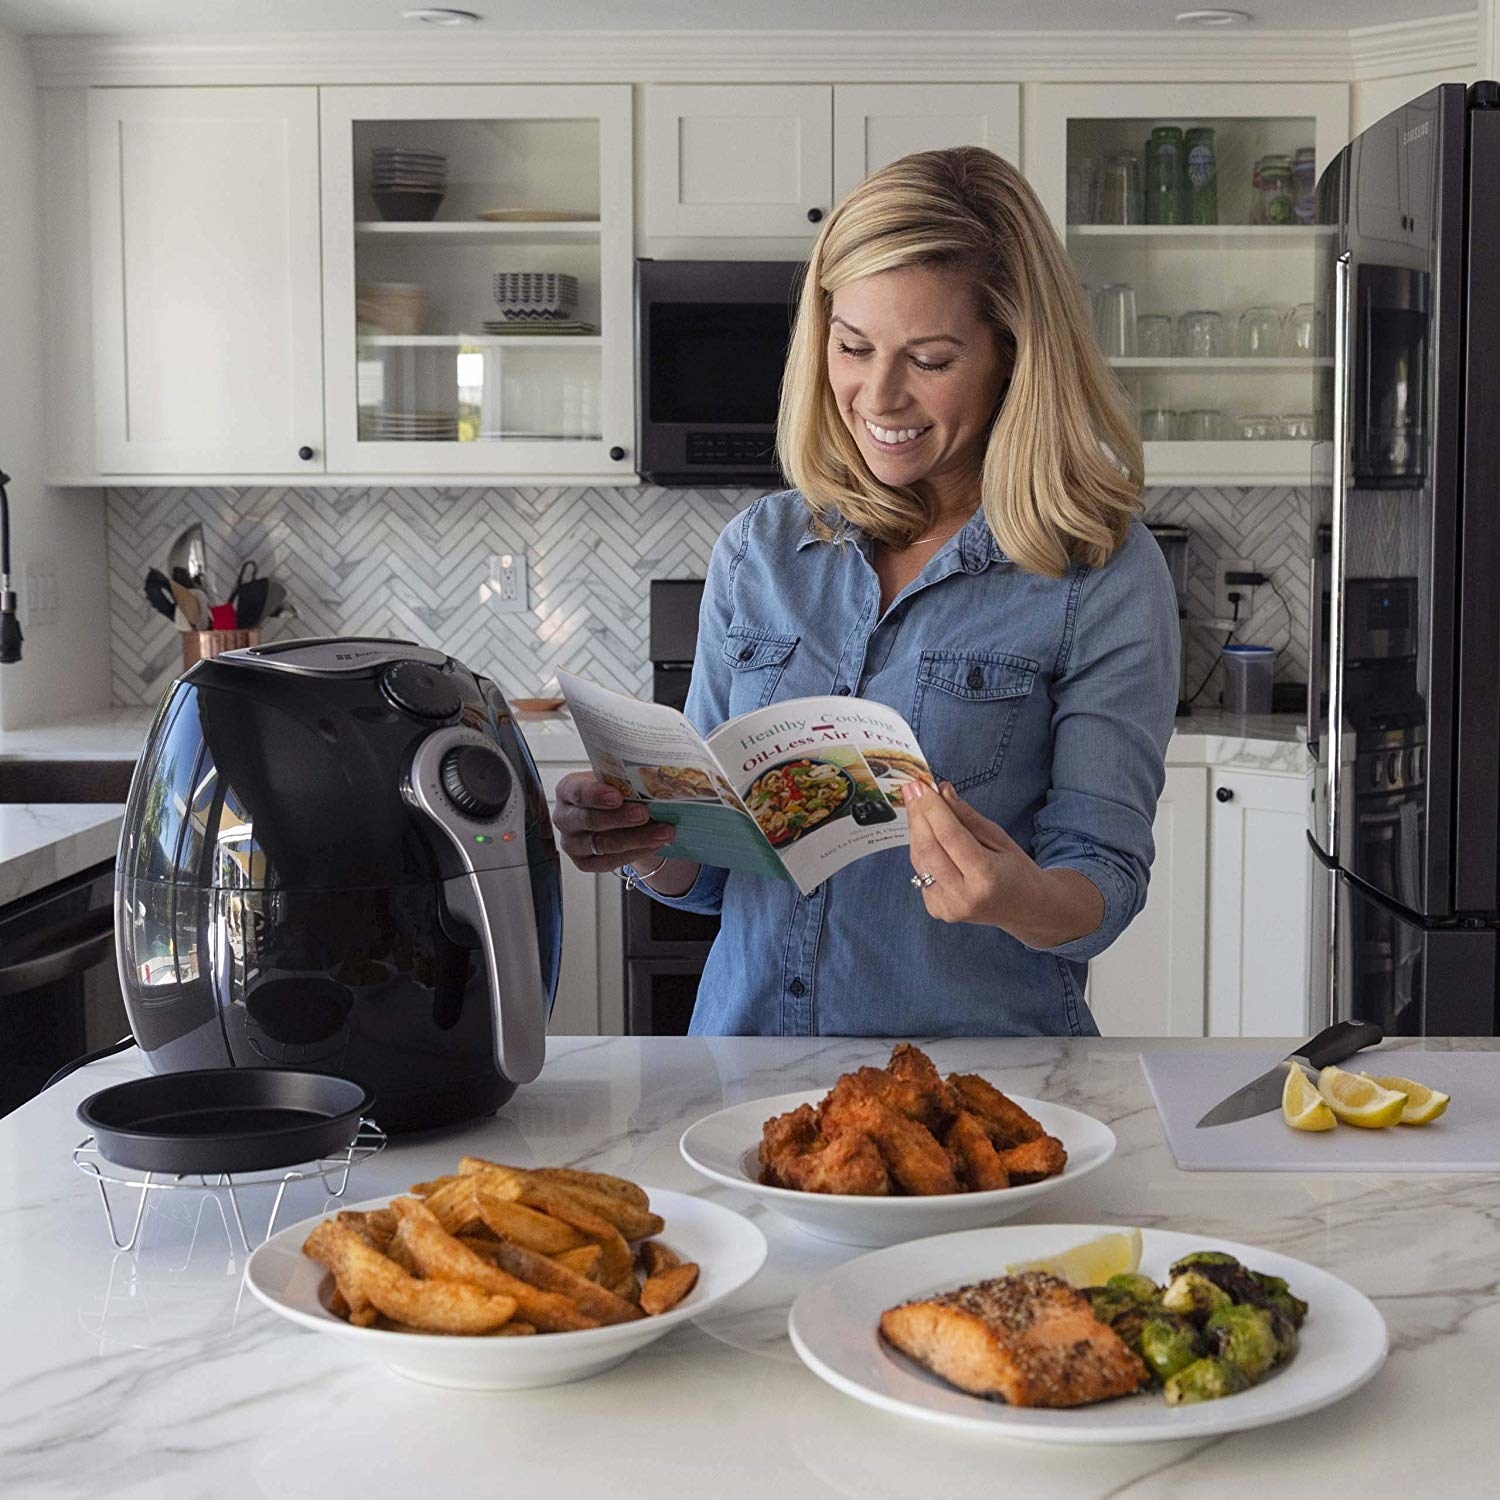 Model looking at the air fryer, reading the guide, with plates of air fried fries, wings, and salmon and brussels sprouts on the counter